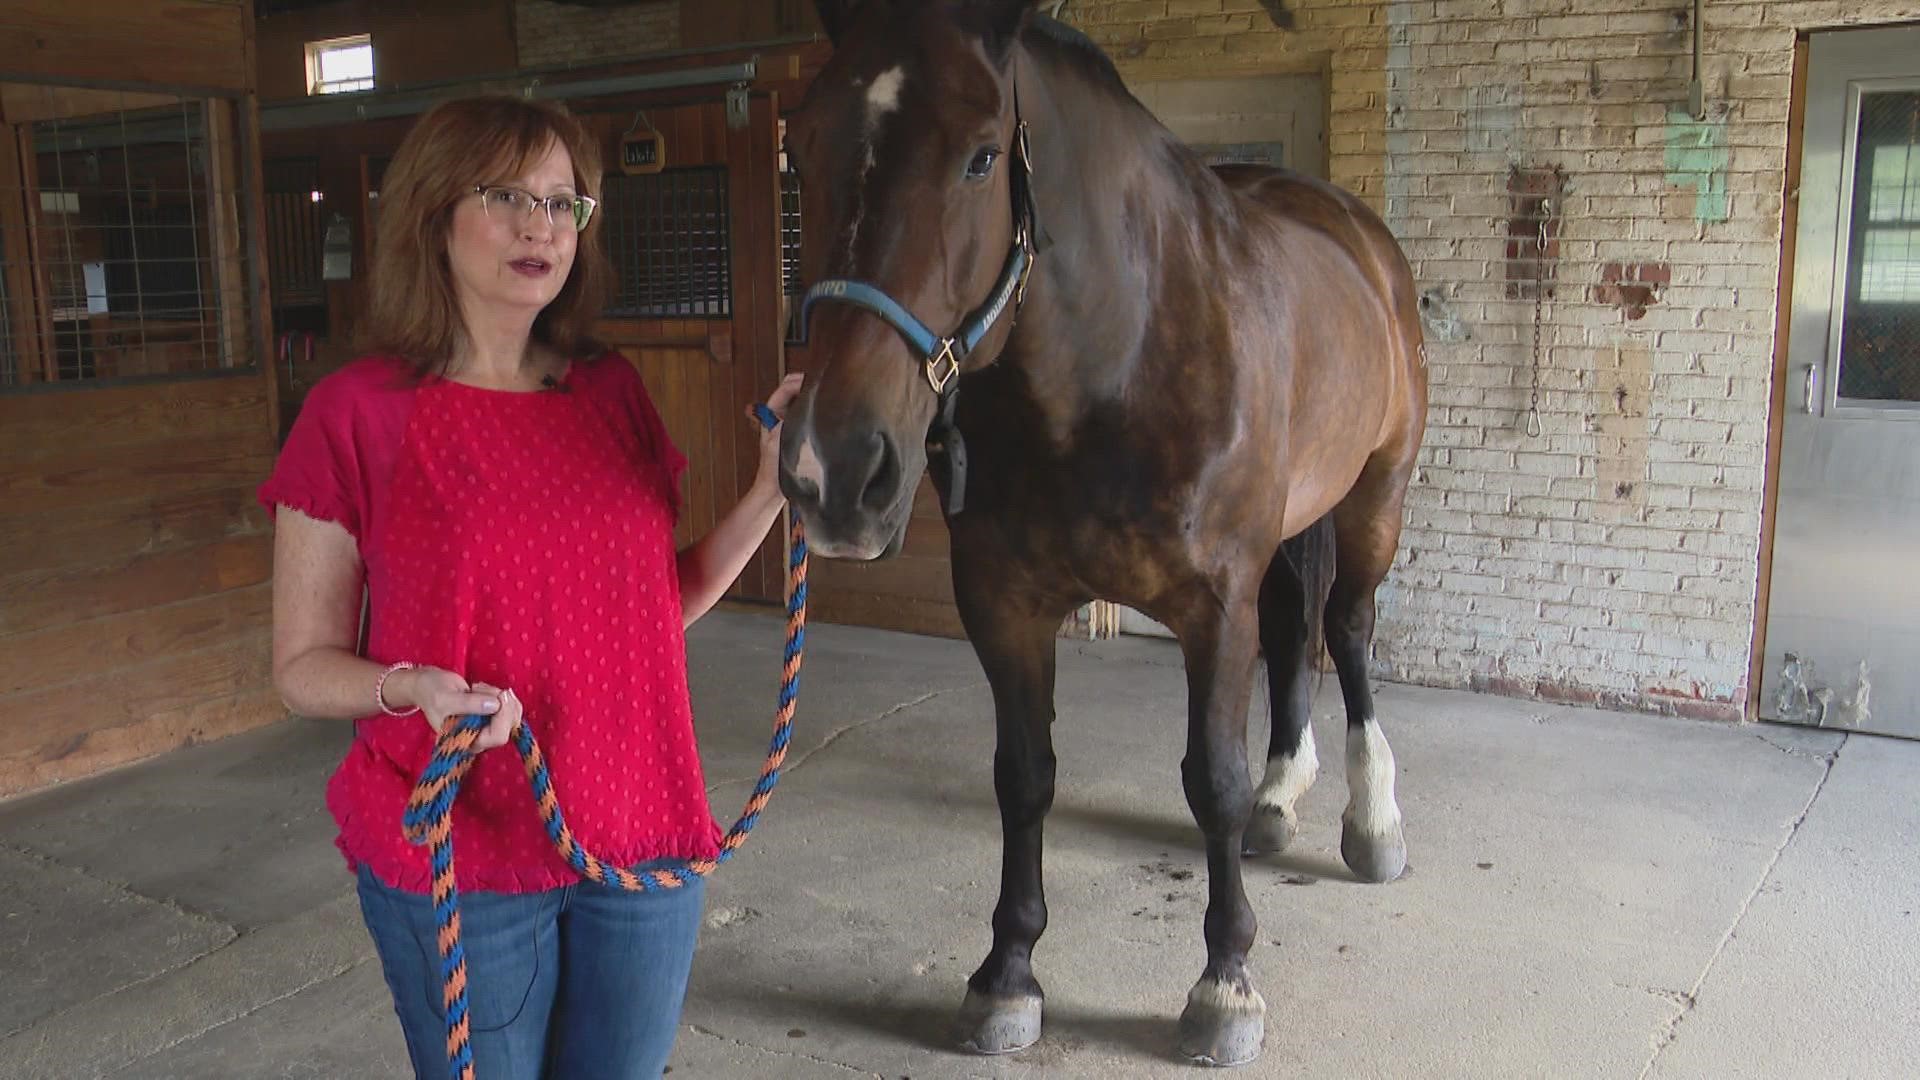 IMPD's Mounted Patrol will soon be without a headquarters. John Doran tells us how this police division is looking for donations to build a new home.